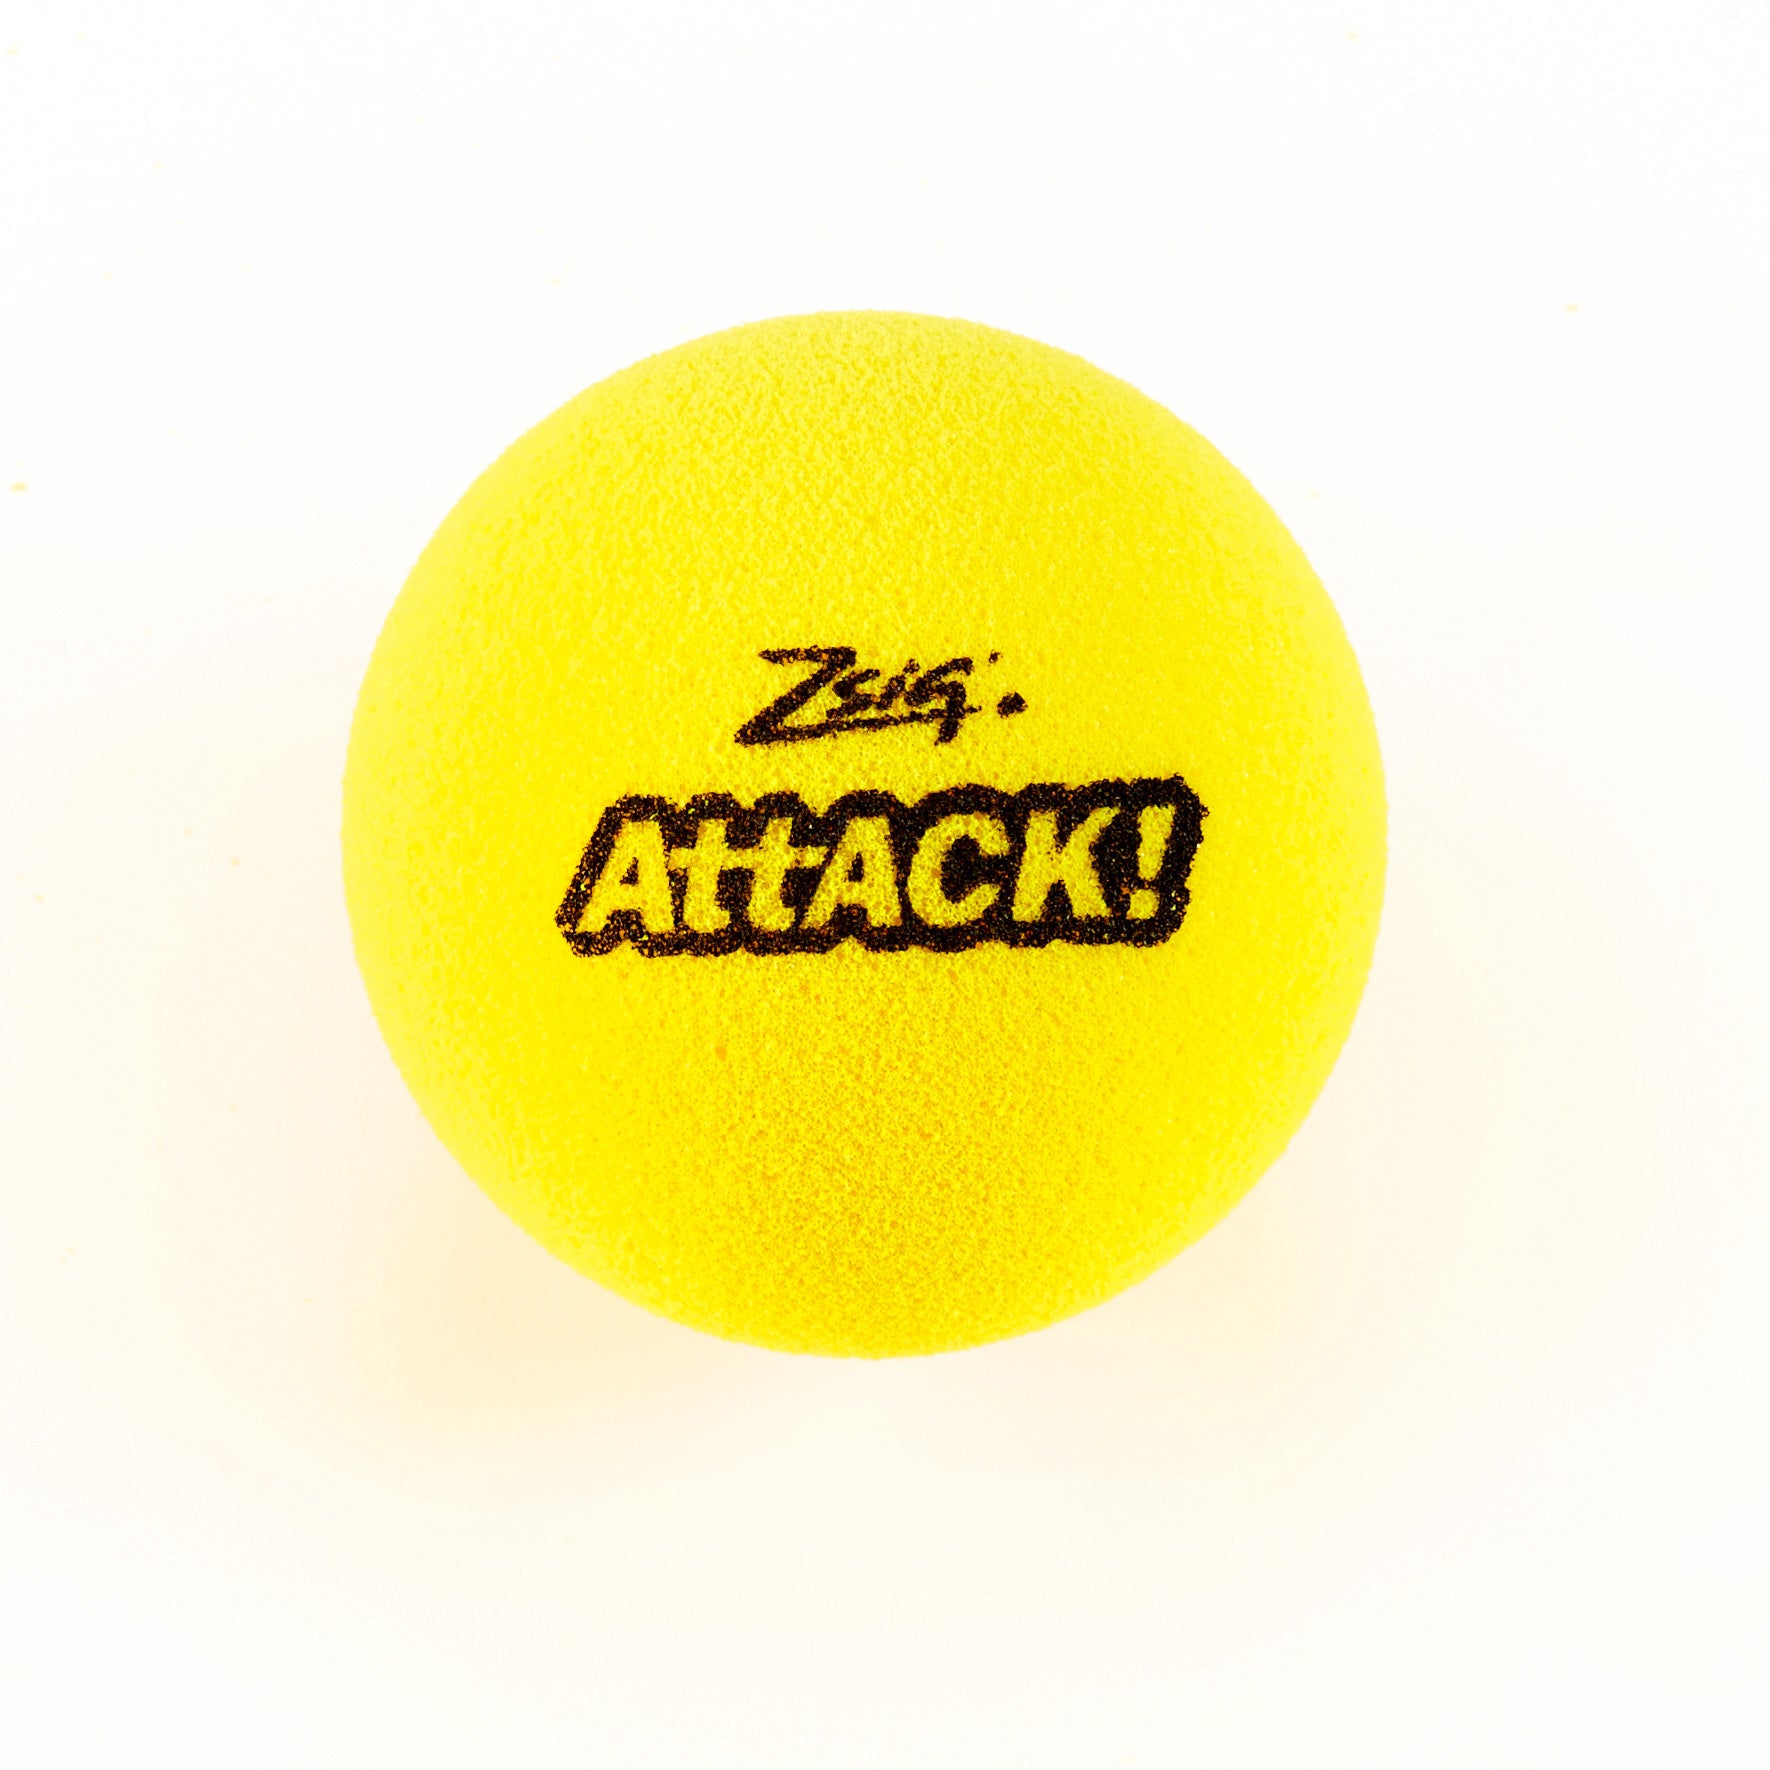 AttACK! fast-paced touchtennis balls - single ball